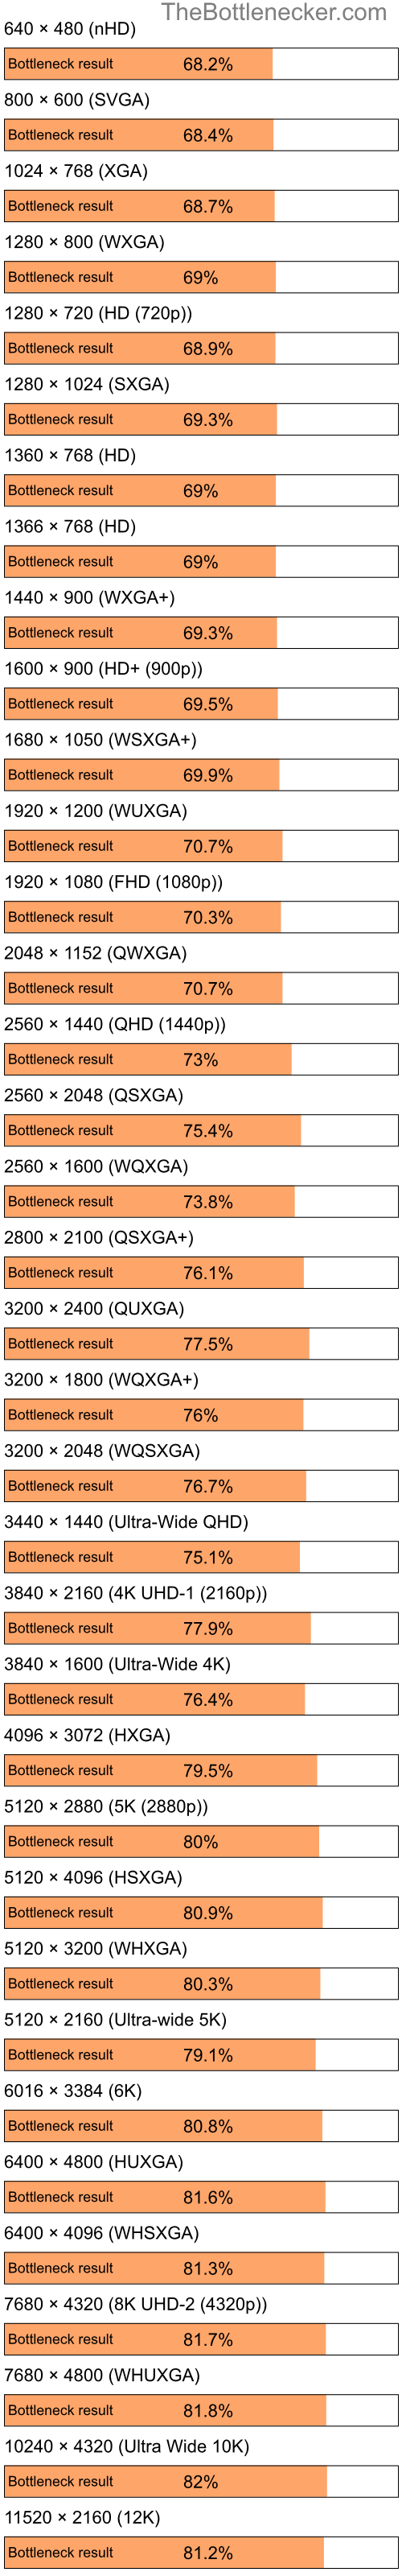 Bottleneck results by resolution for Intel Celeron and NVIDIA GeForce 6700 XL in Graphic Card Intense Tasks